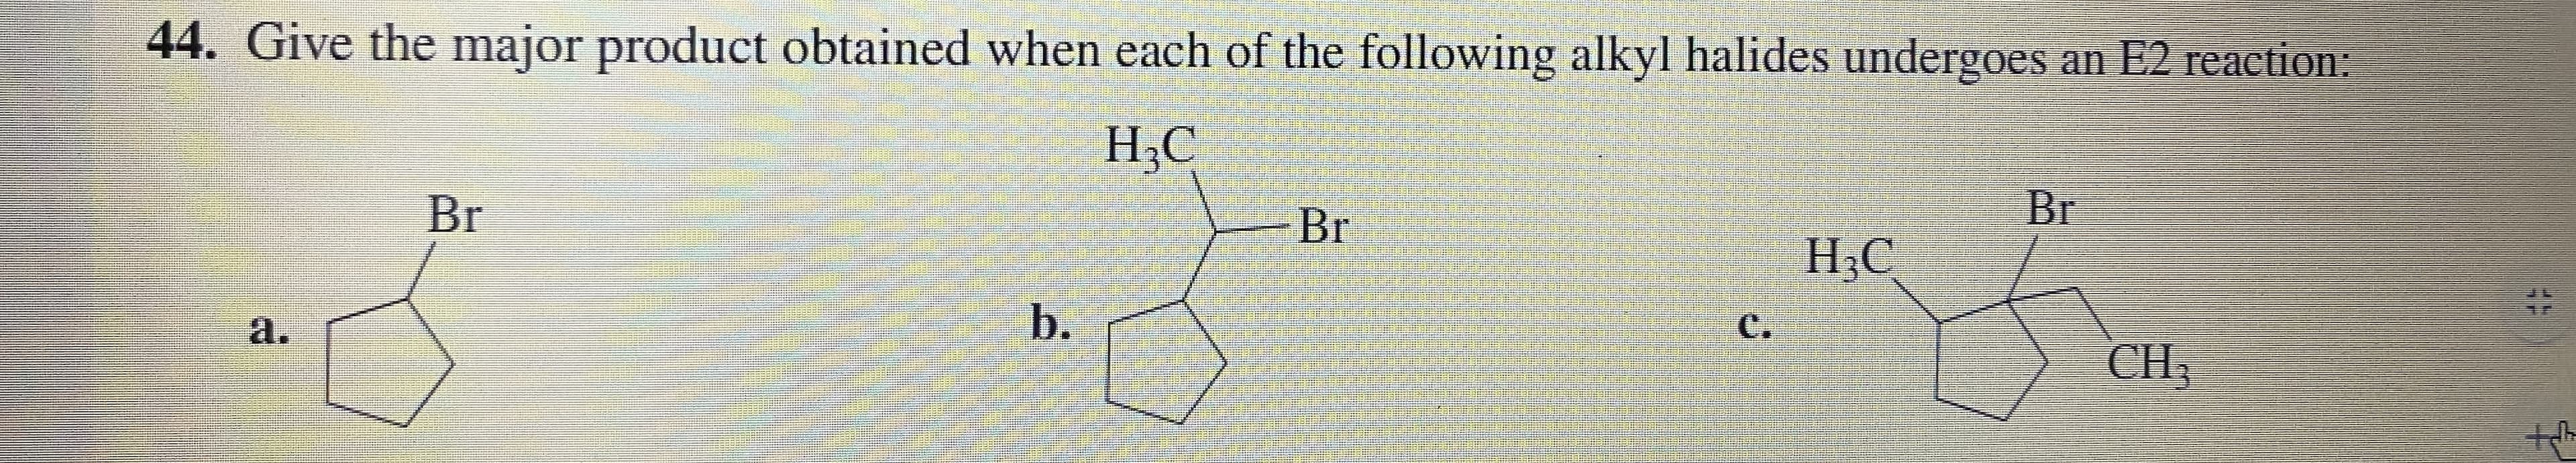 . Give the major product obtained when each of the following alkyl halides undergoes an E2 reaction:
